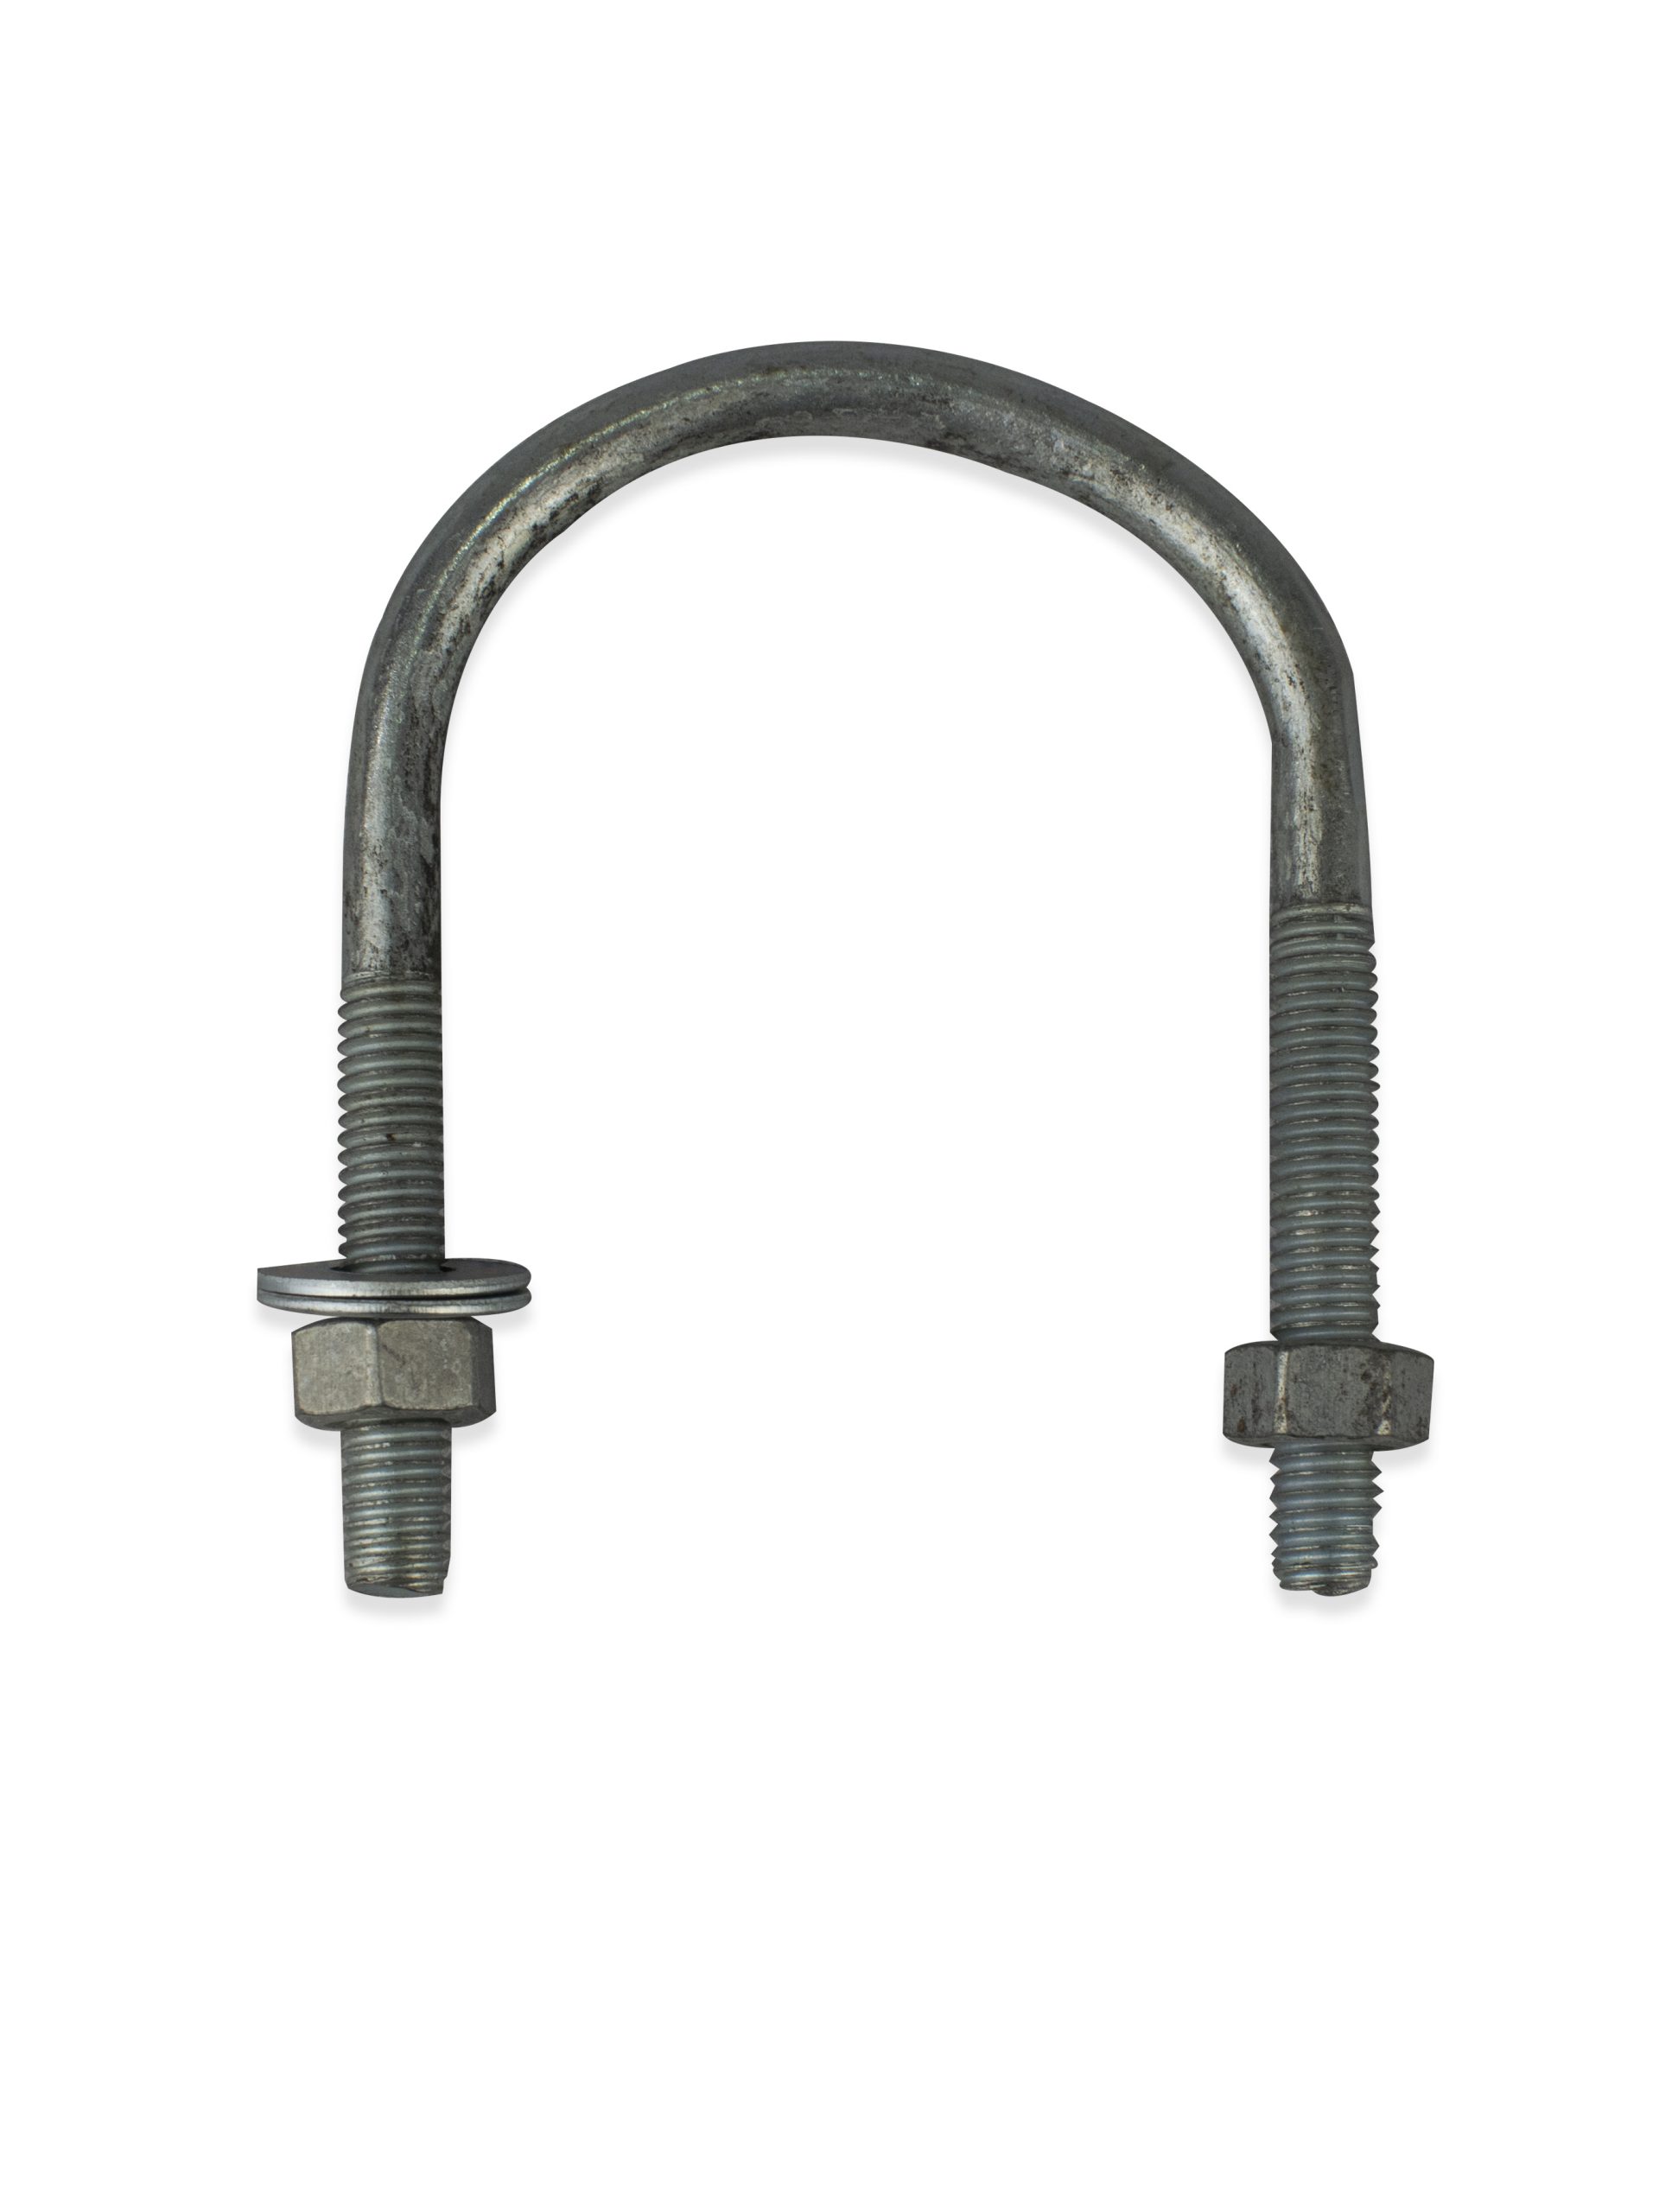 U BOLT 1 1/2 Inches X 8 MM WITH NUTS AND WASHERS from Gas Equipment Company Llc Abu Dhabi, UNITED ARAB EMIRATES